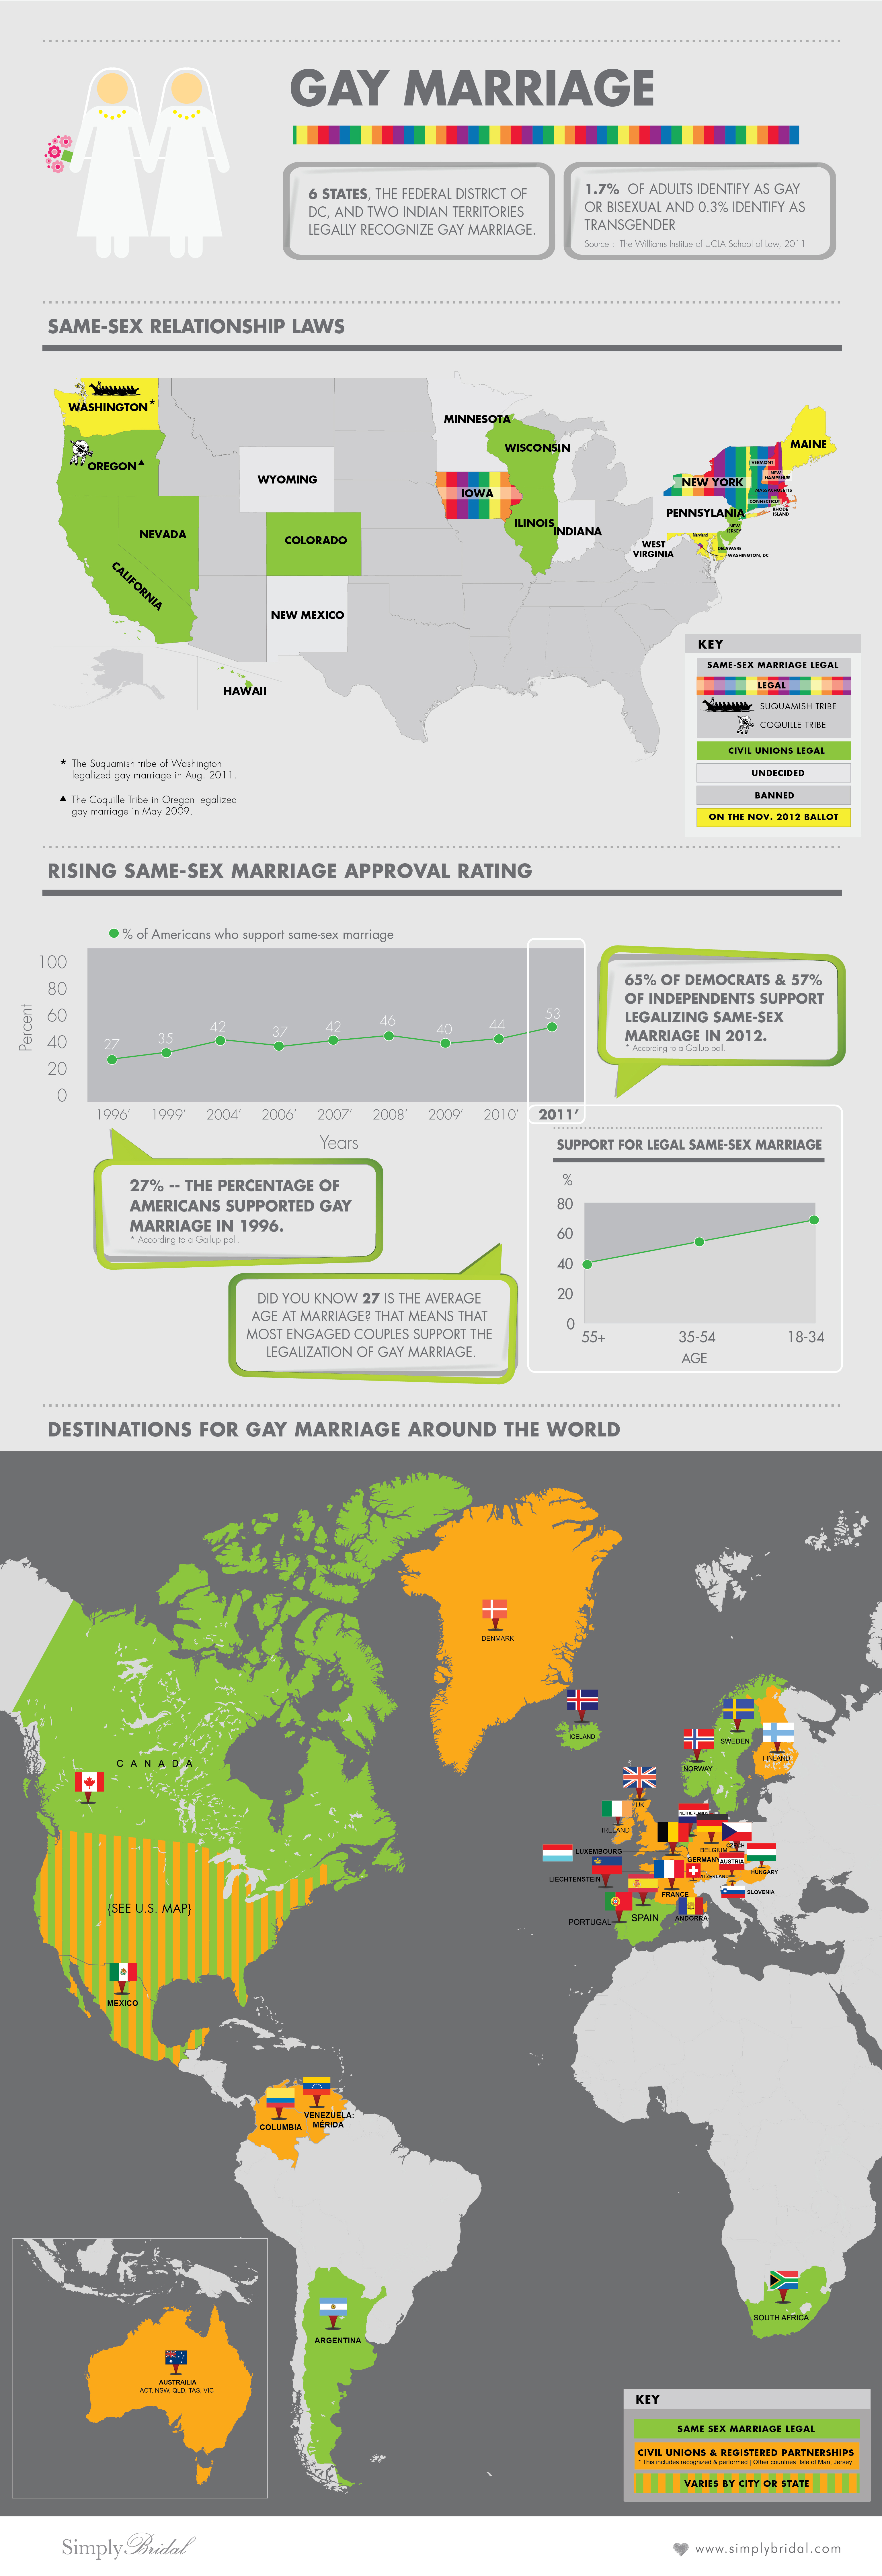 statistics and Gay facts marriage